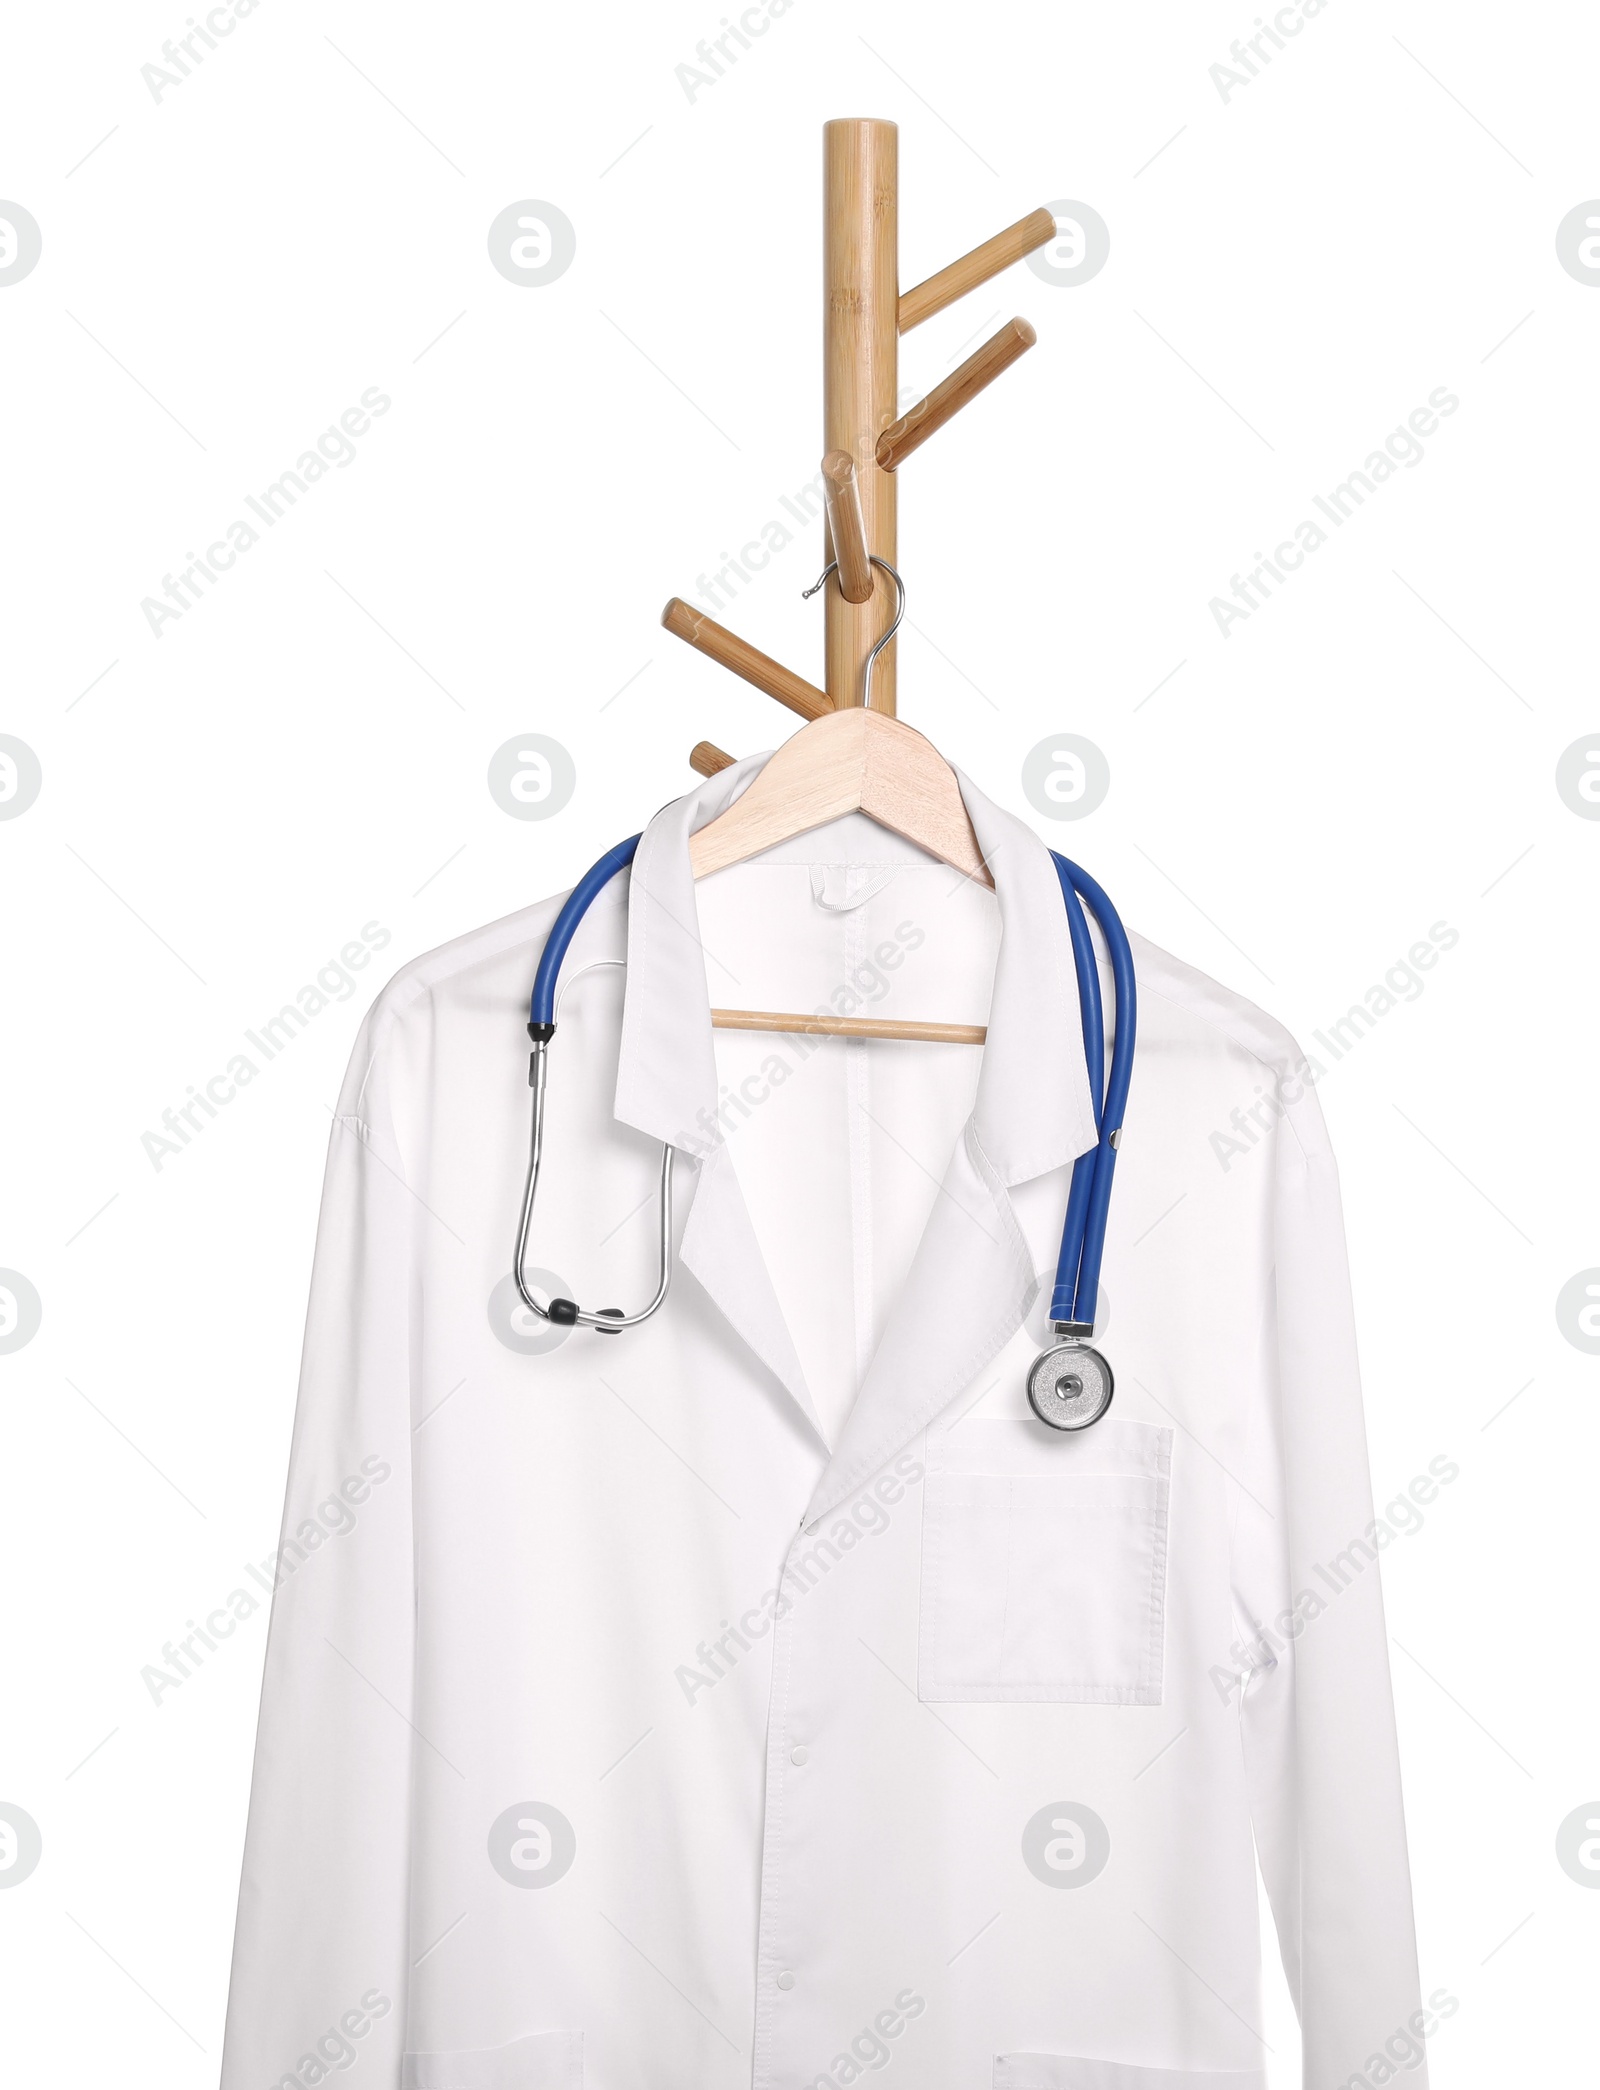 Photo of Doctor's gown and stethoscope on rack against white background. Medical uniform